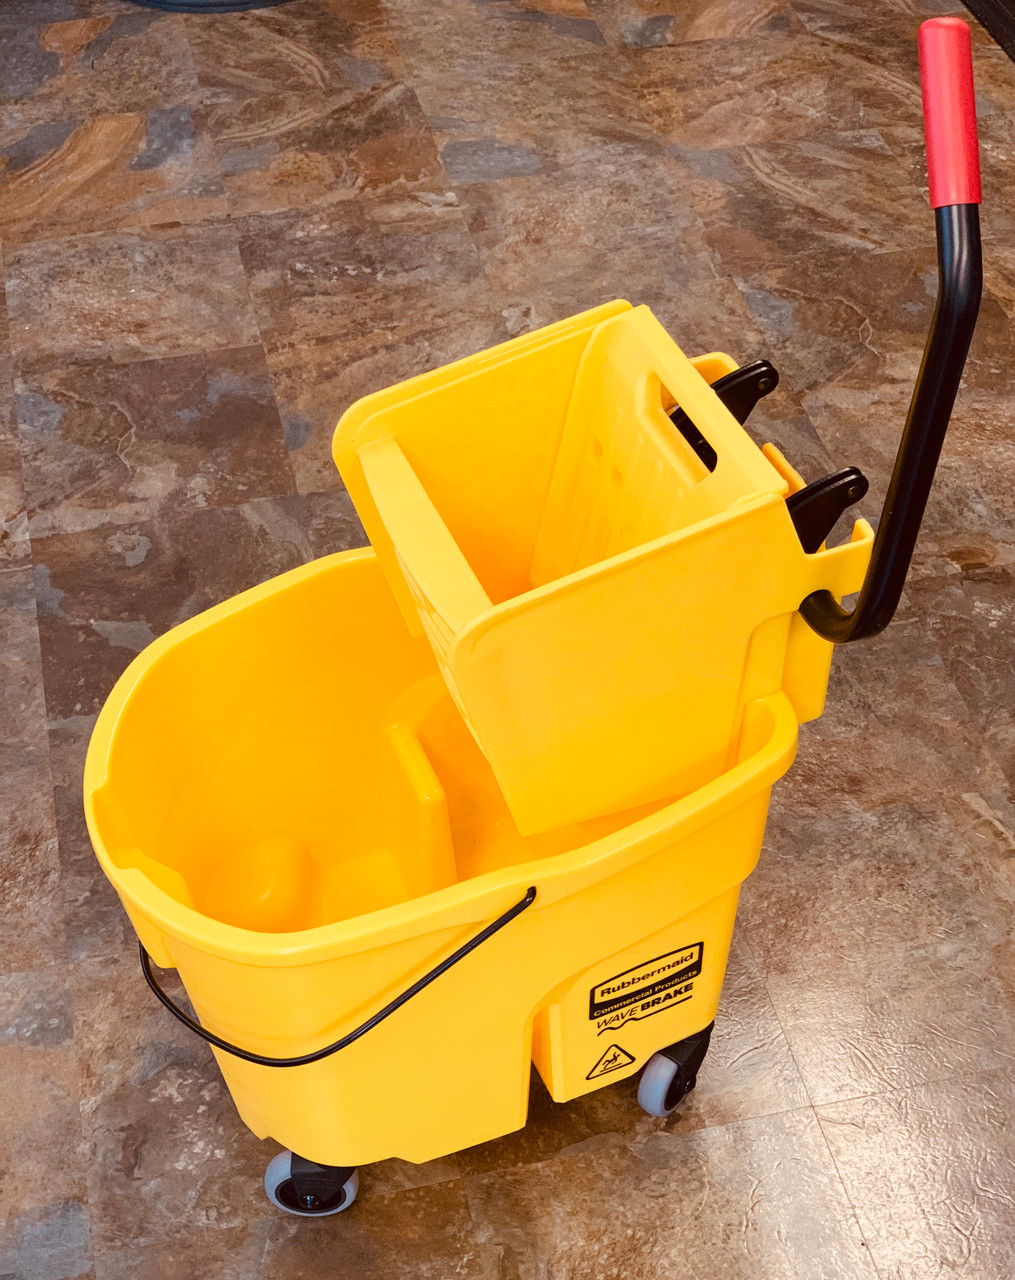 Rubbermaid Commercial Products Mop Bucket